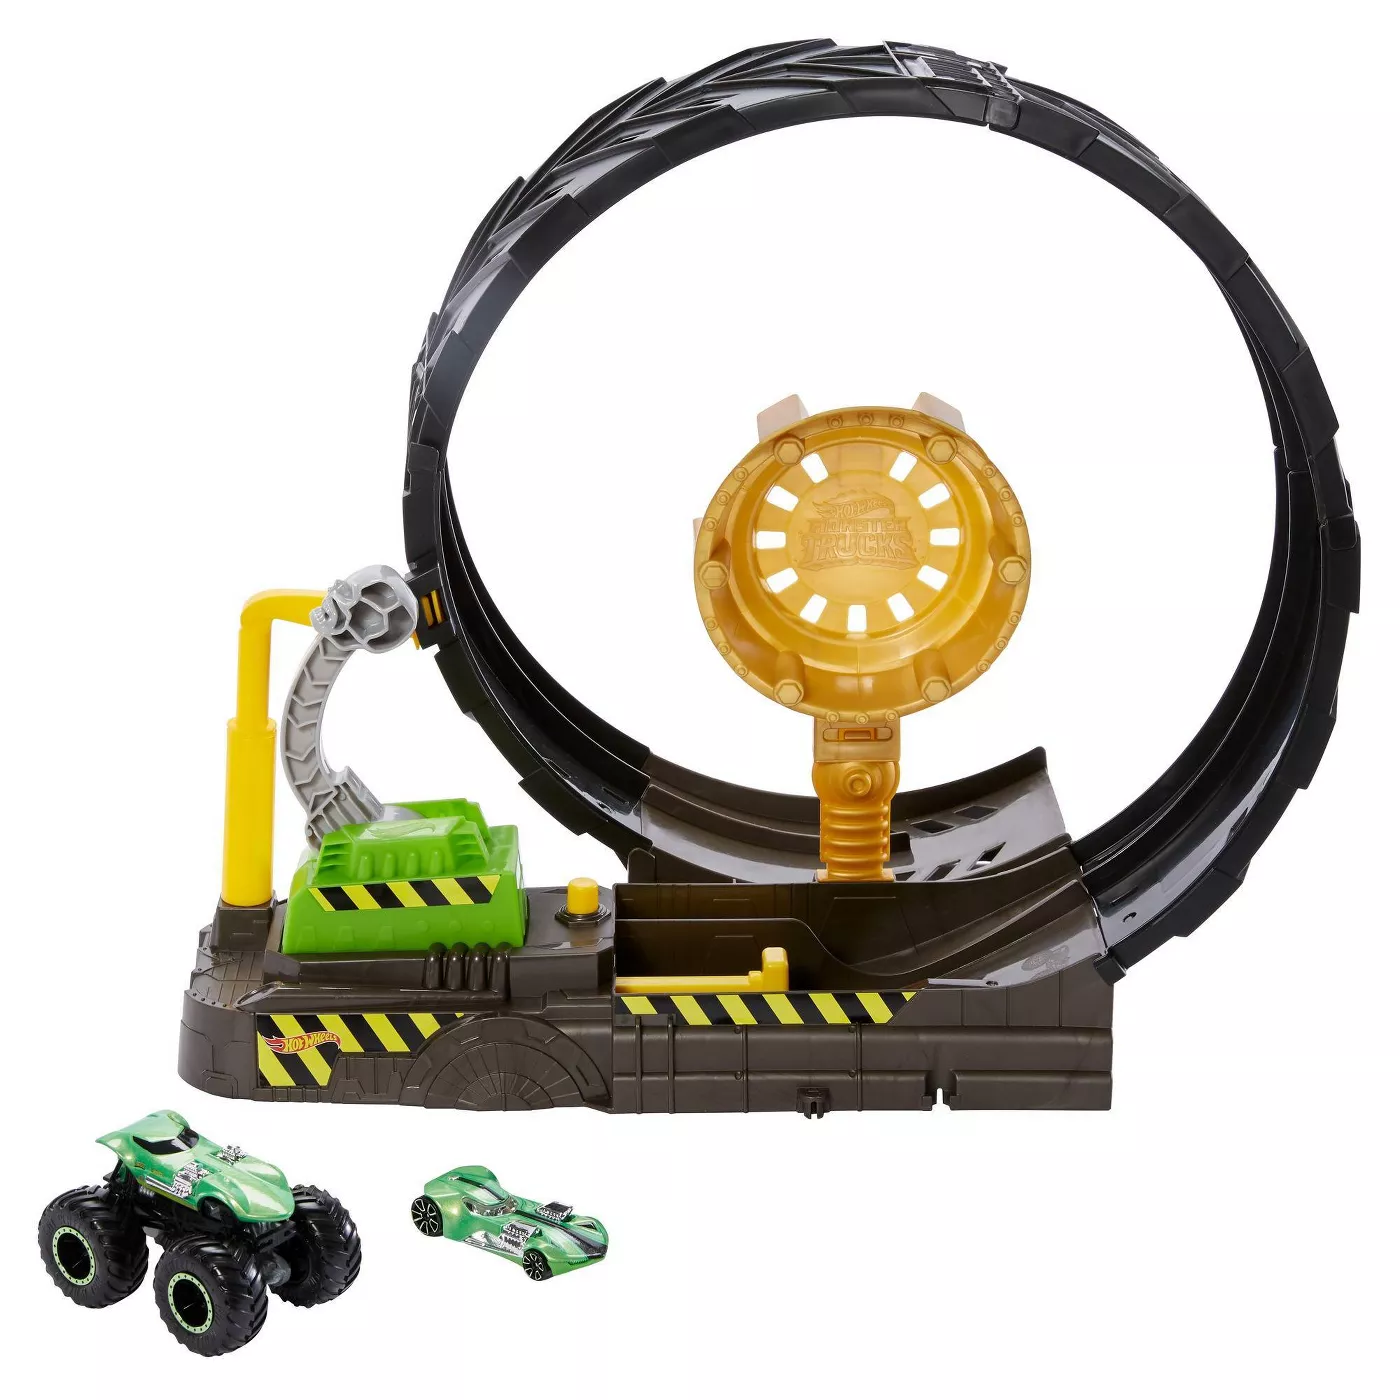 Hot Wheels Monster Truck Epic Loop Challenge Play Set with Truck and Car - image 1 of 6